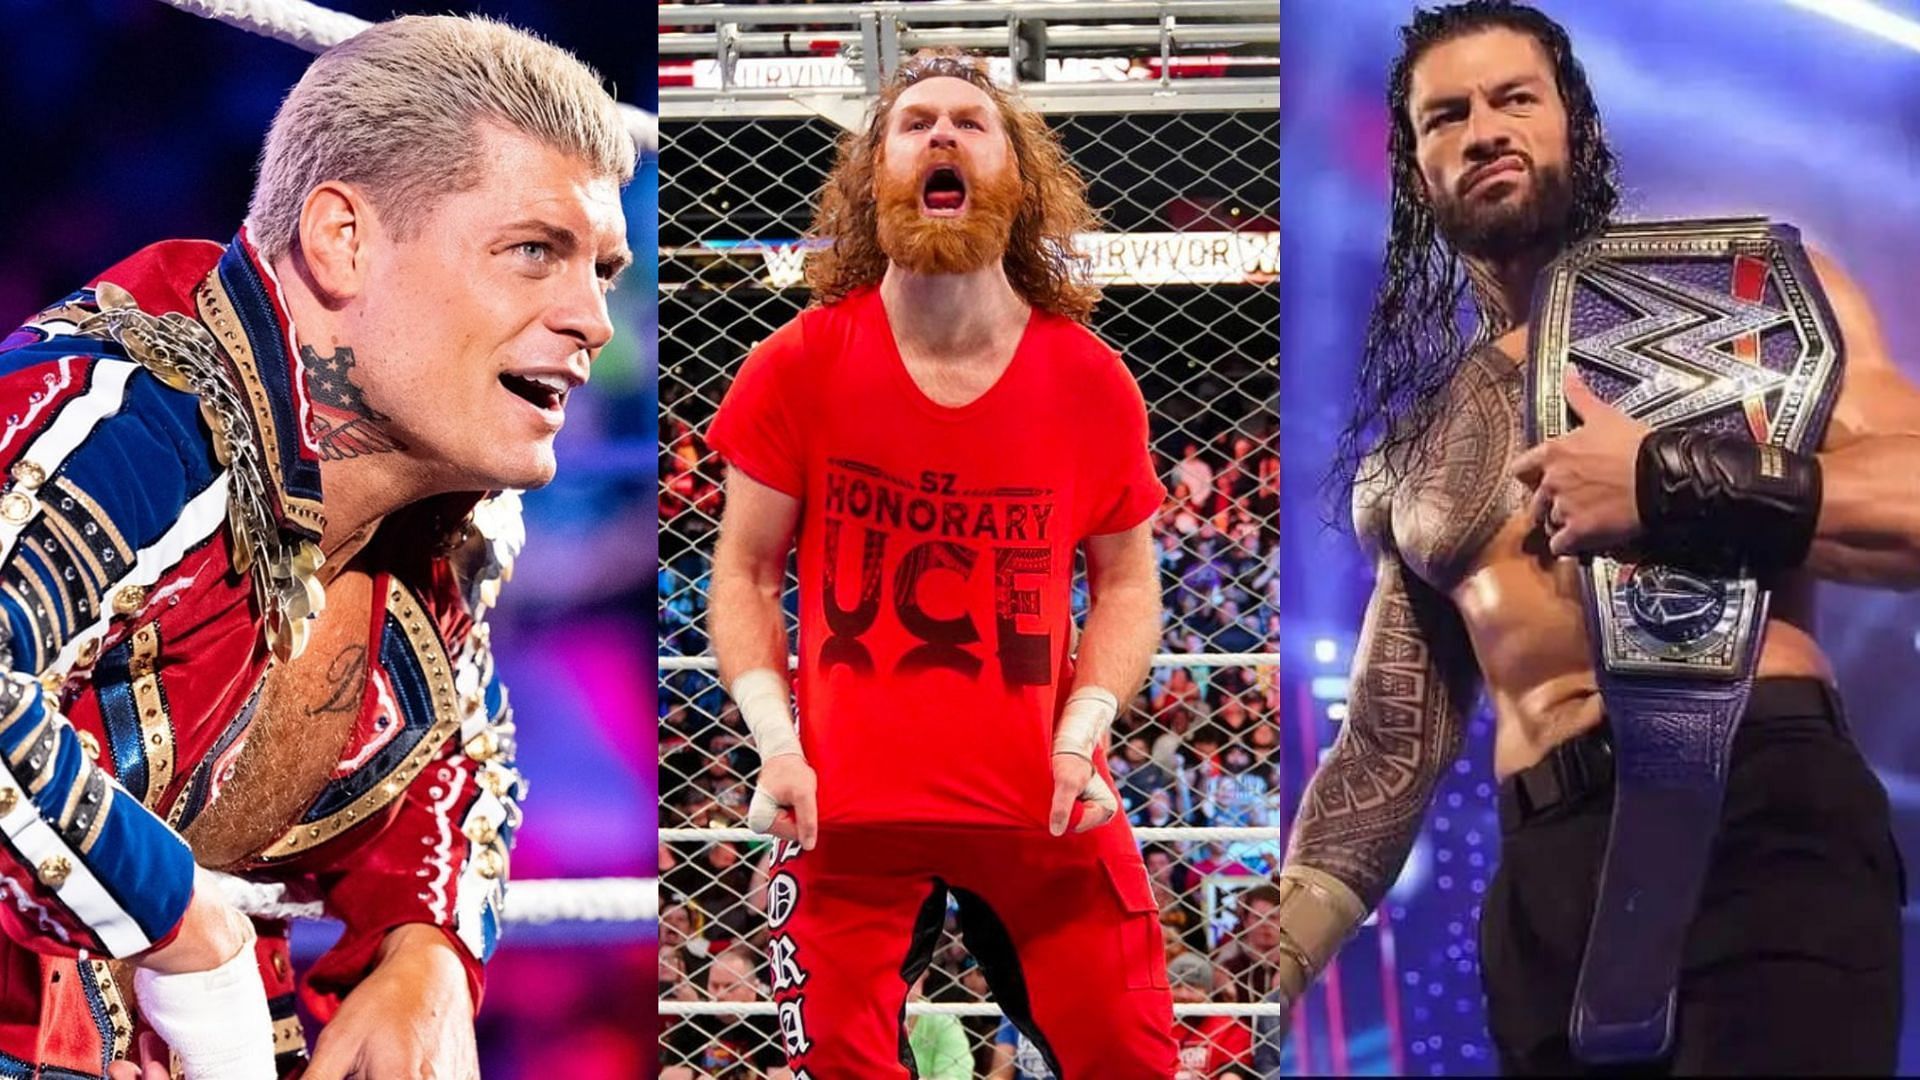 WWE fans on Twitter have reacted to the idea of a Triple Threat Match betwe...